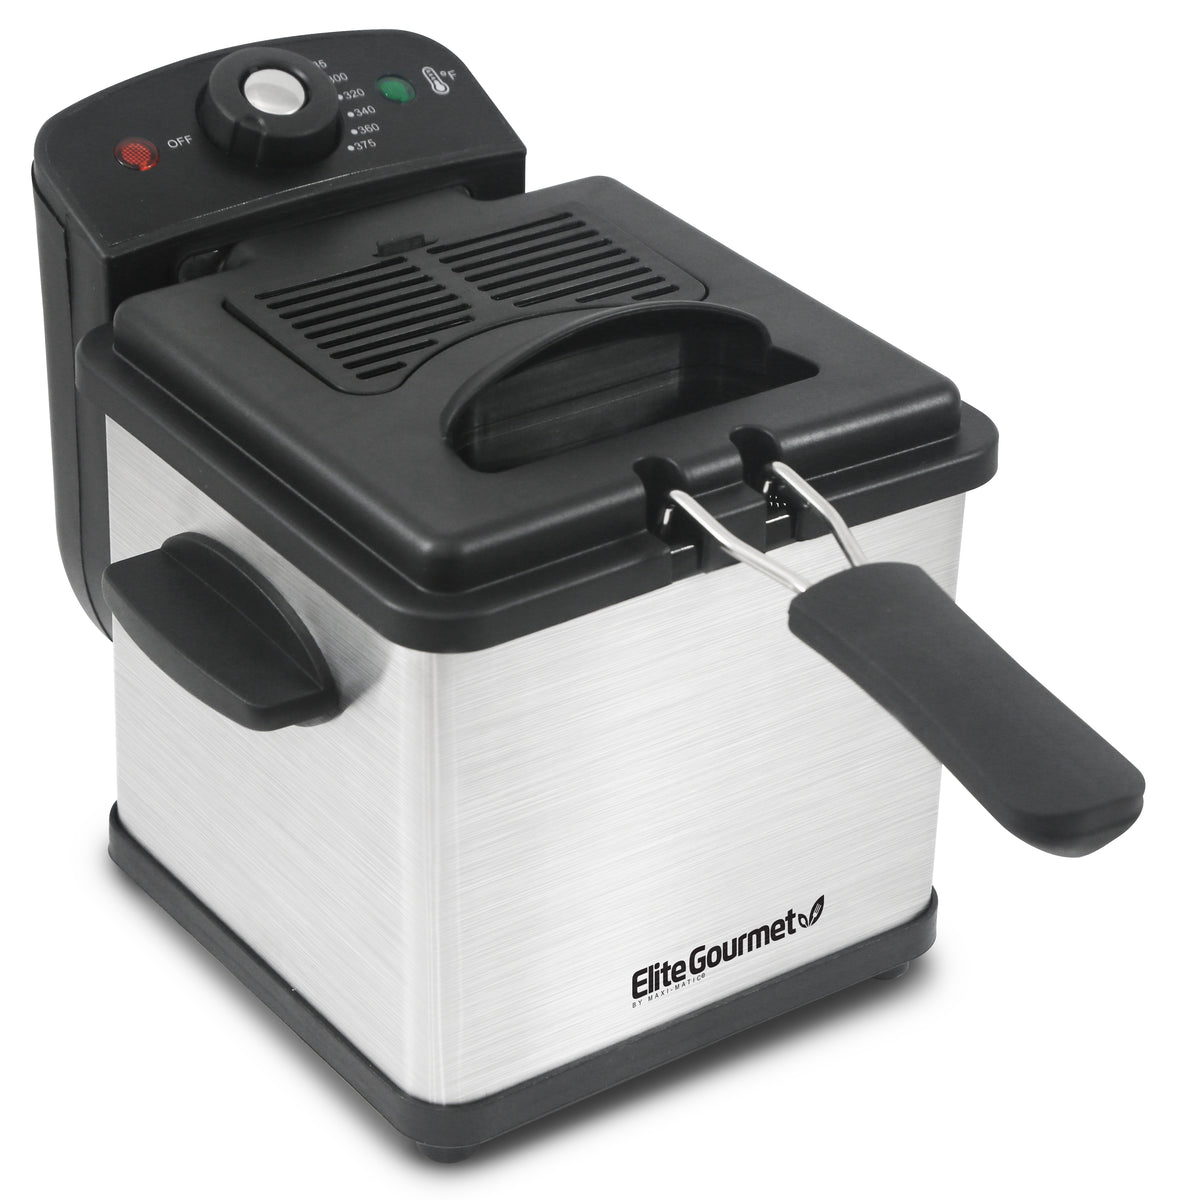 Mondawe Silver 2500W Single Electric Deep Fryer with Drain Feature and  Removable Fry Basket - Temperature Controls - Ready Light Indicator in the Deep  Fryers department at